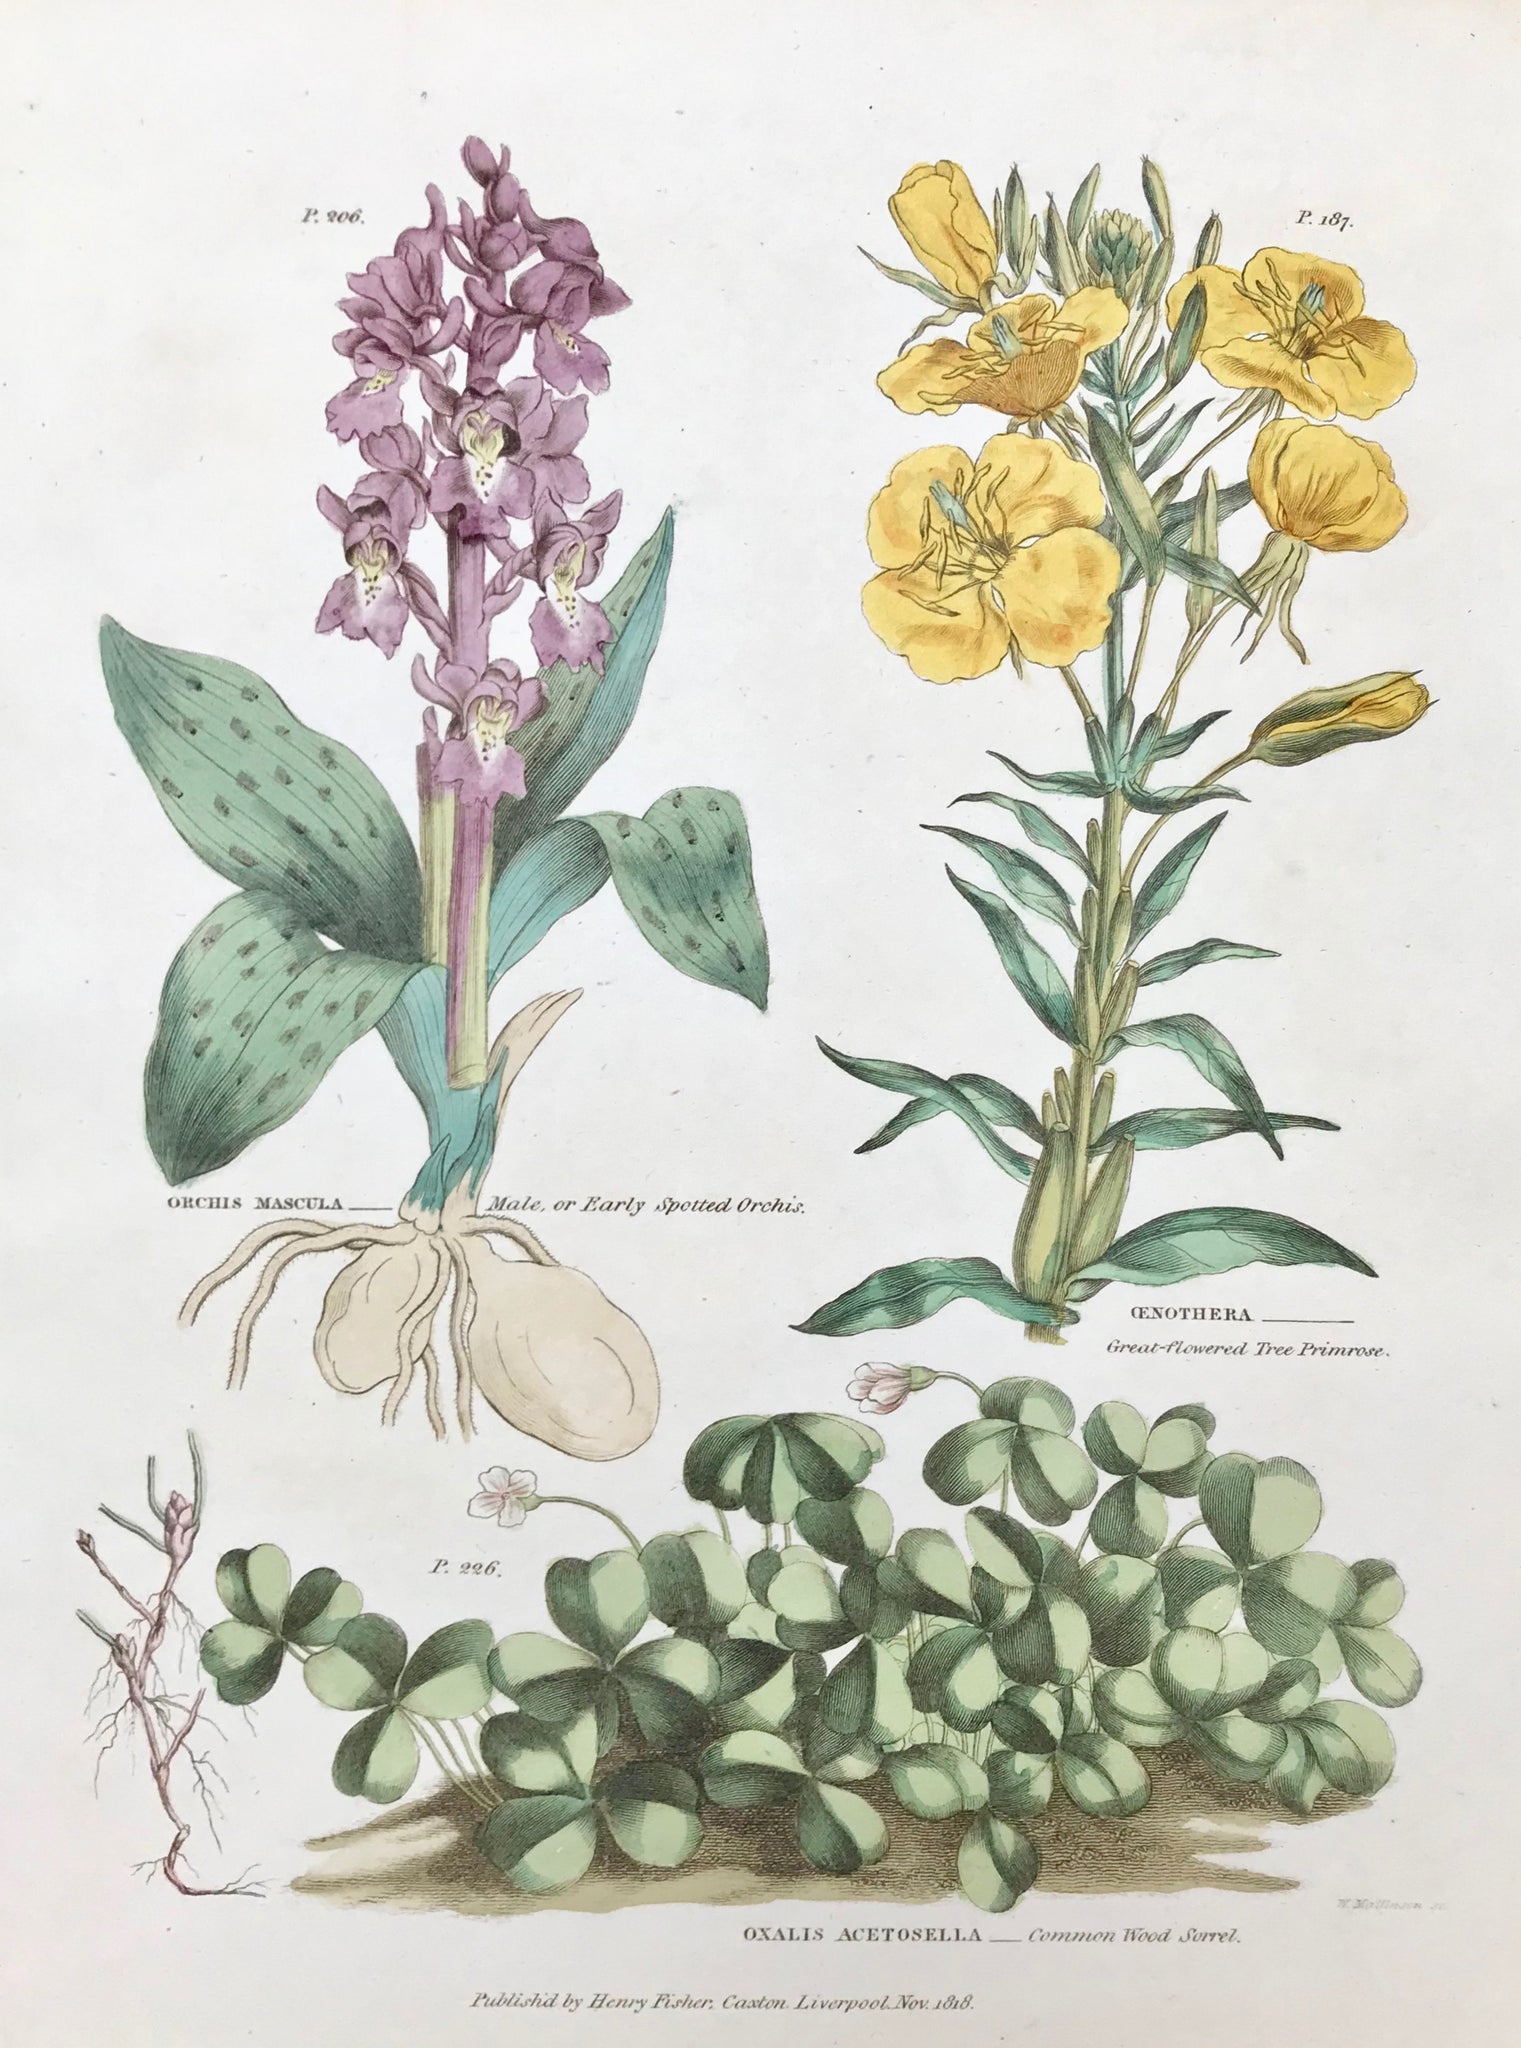 Upper left: Orchis Mascula Male, or Early Spotted Orchis. Upper right: Oenothera Great-flowered Tree Primrose. Bottom: Oaxalis Acetosella Common Wood Sorrel.     Antique Botanical Prints from  "The Universal Herbal" by Thomas Green.  The complete title of this accurately and absolutely delightfully hand-colored work is: "The Universal Herbal", or Botanical, Medical, and Agricultural Dictionary, containing an Account of all the known Plants in the World arranged according to the Linnean System, 